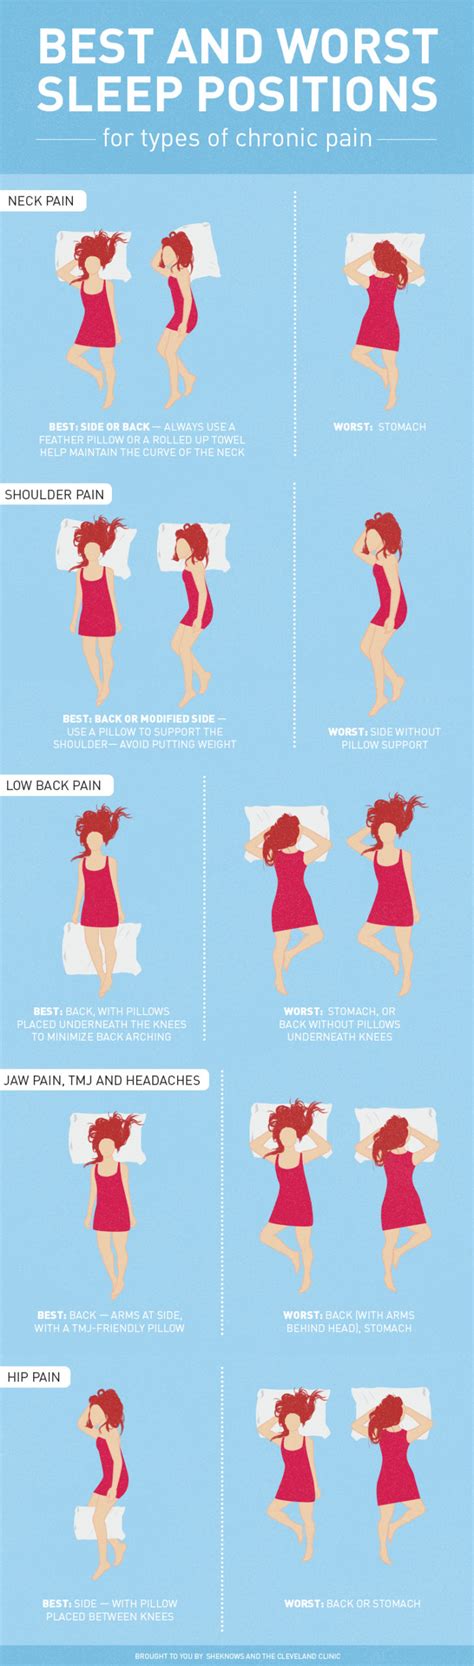 This Infographic Shows The Best And Worst Sleeping Positions For Common Pains